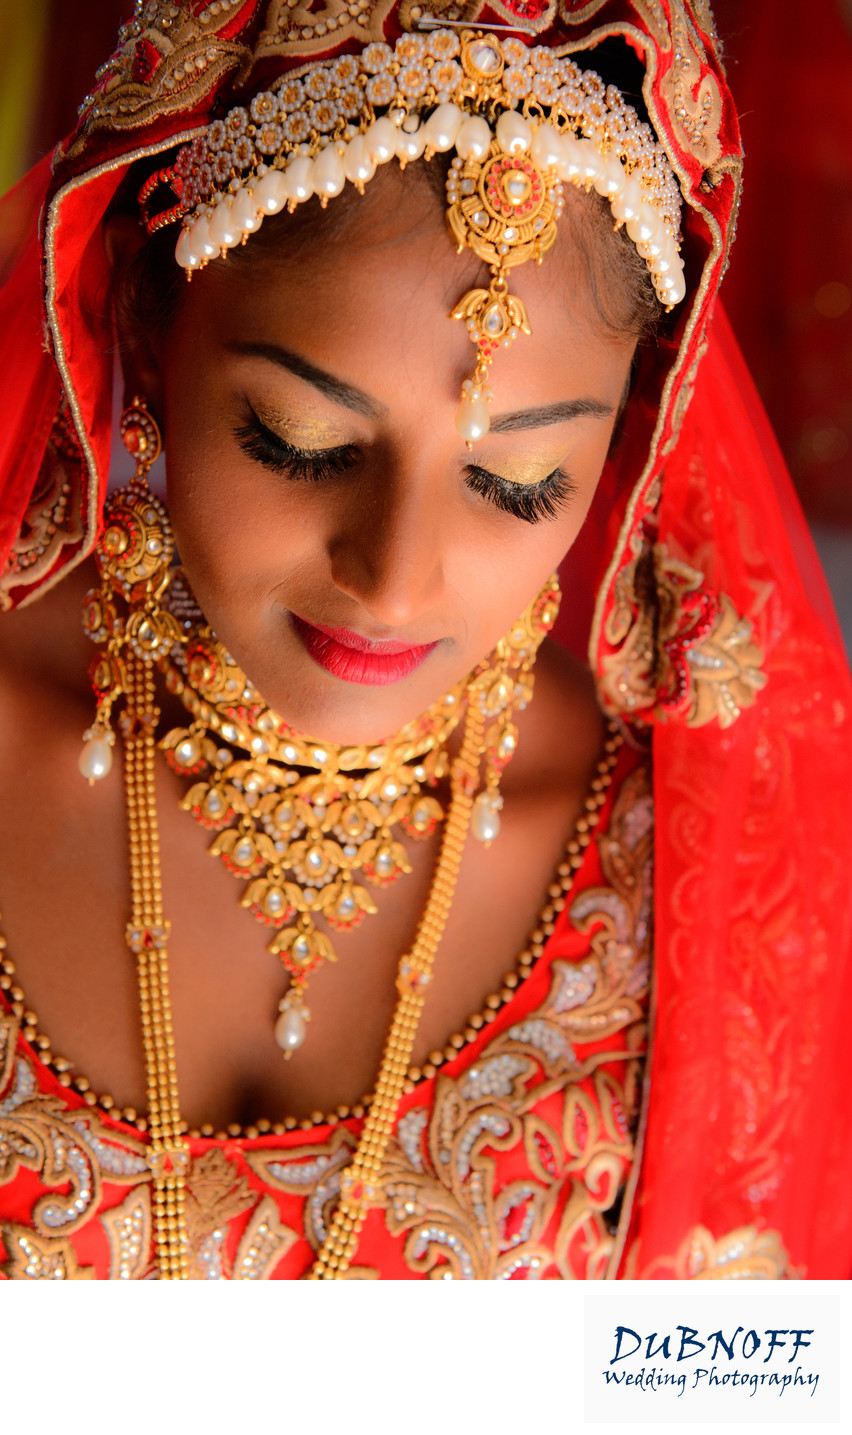 Dramatic Wedding Photography Image of an Indian Bride